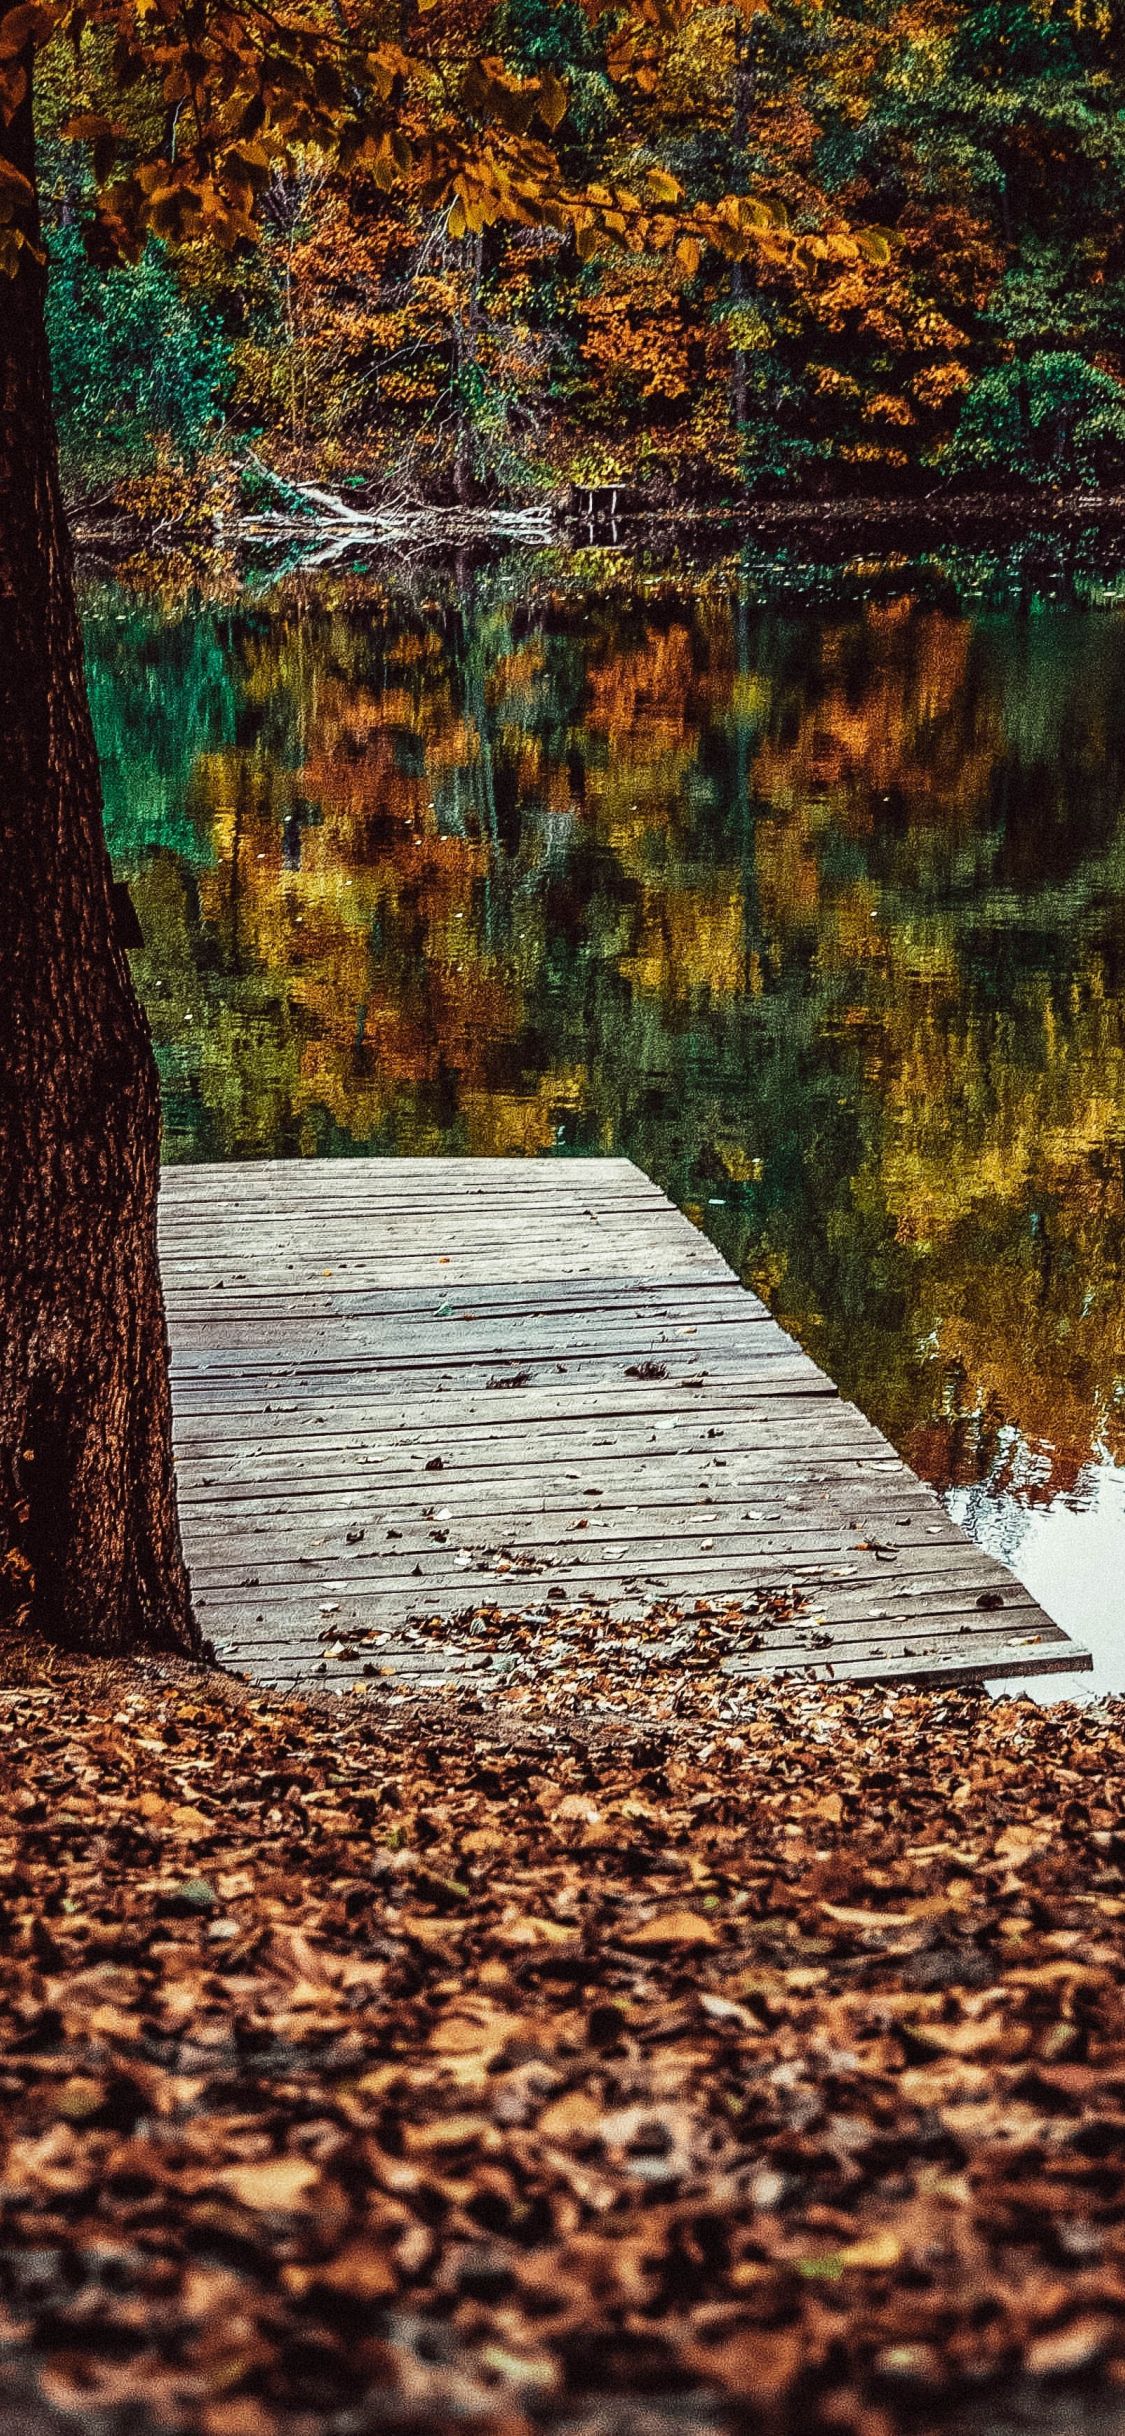 Download 1125x2436 wallpaper pier, lake, fall, leaves, autumn, lake, reflections, iphone x 1125x2436 HD image, background, 15753